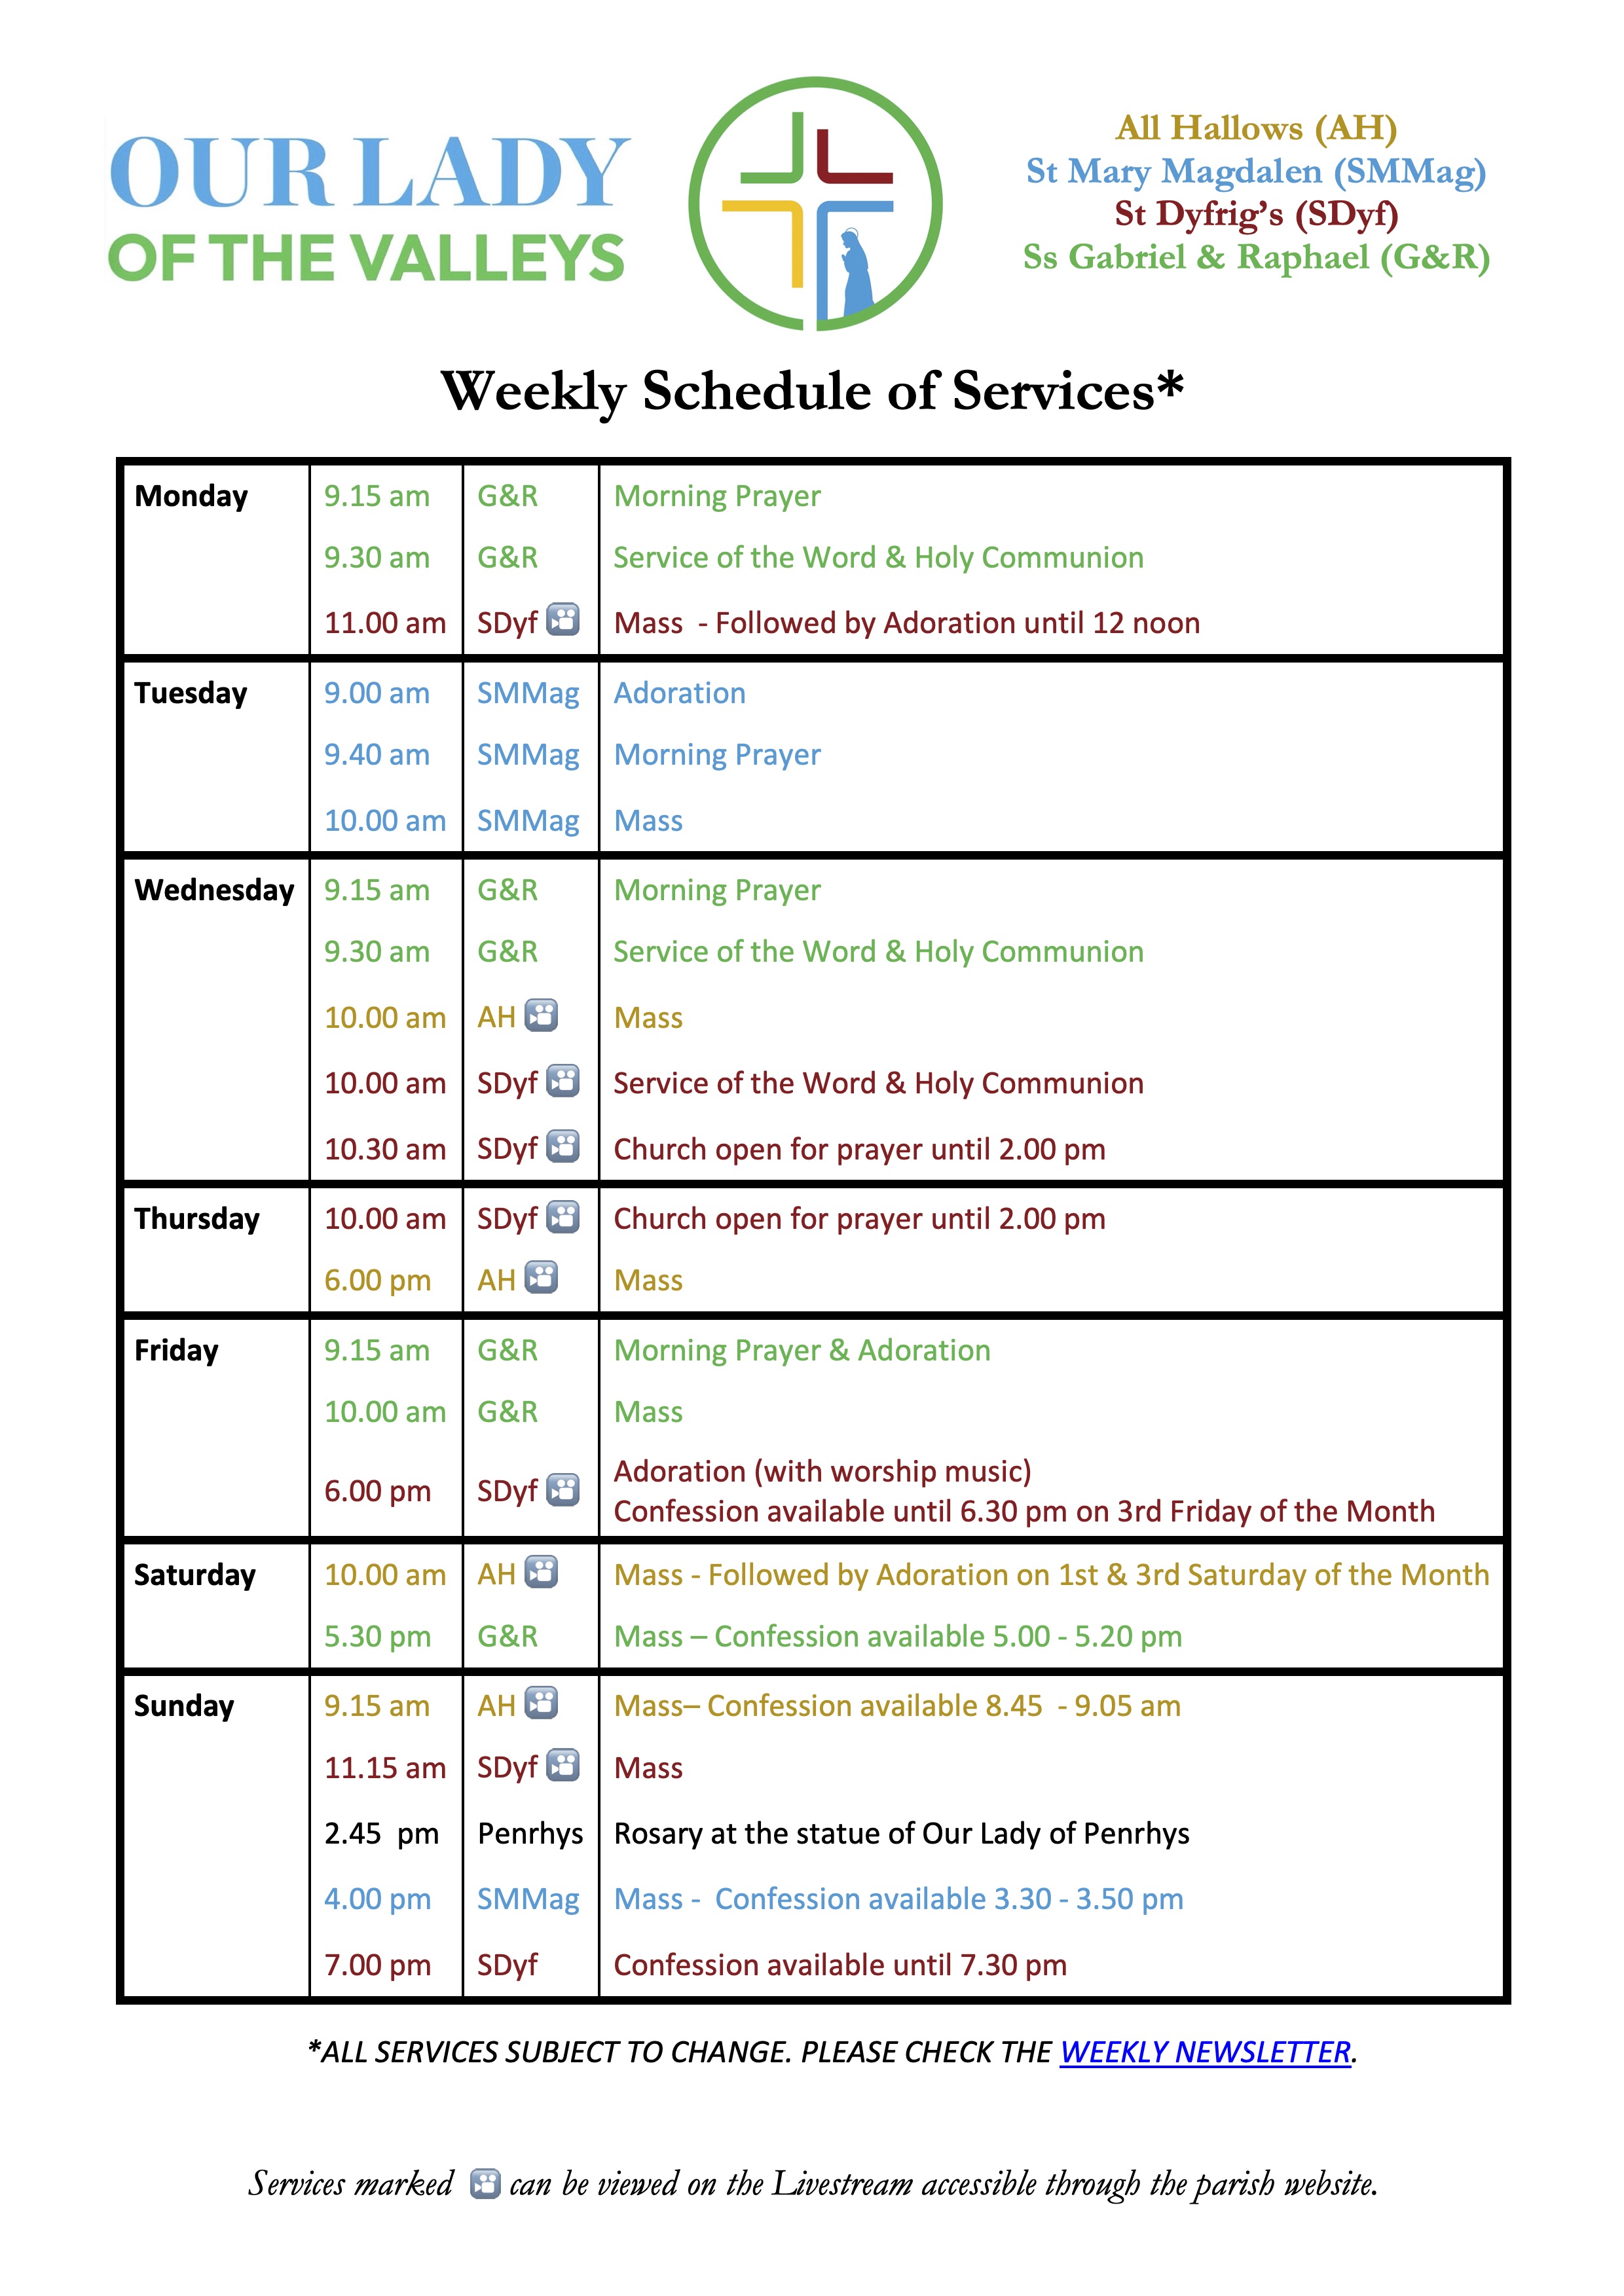 Weekly Services in AMDG